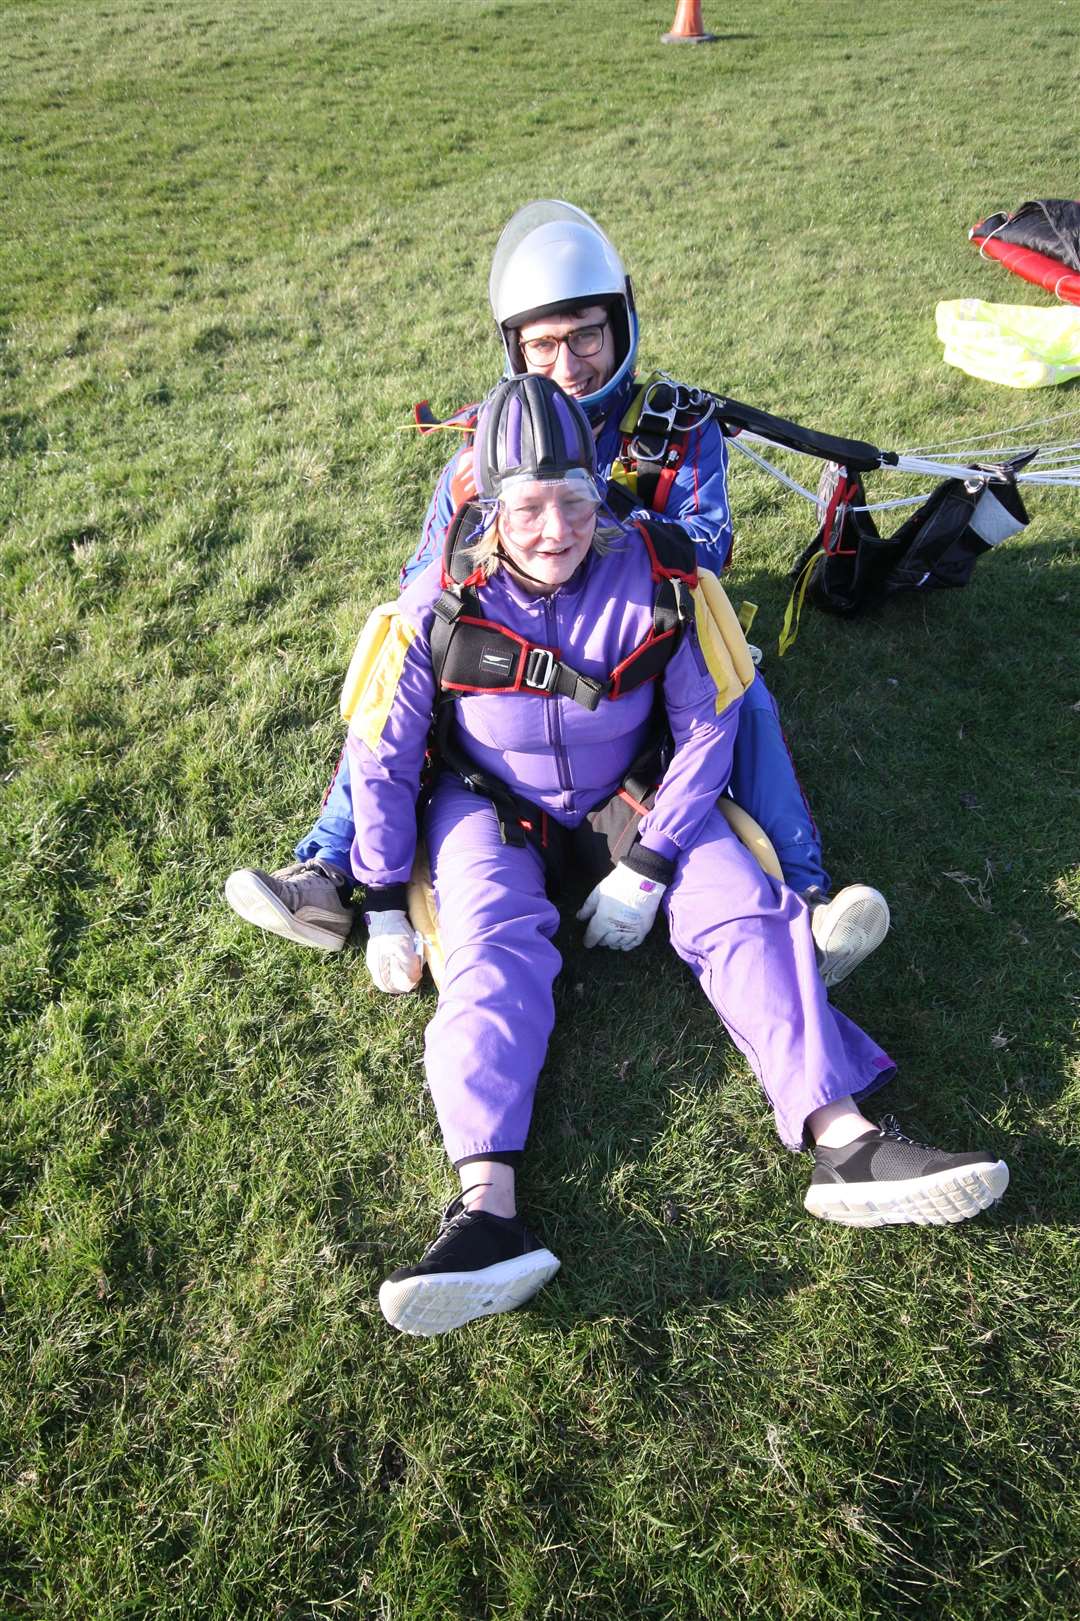 Down safely: Paula Smith from Sheerness East Working Men's Club lands at Headcorn after her charity jump (8174818)